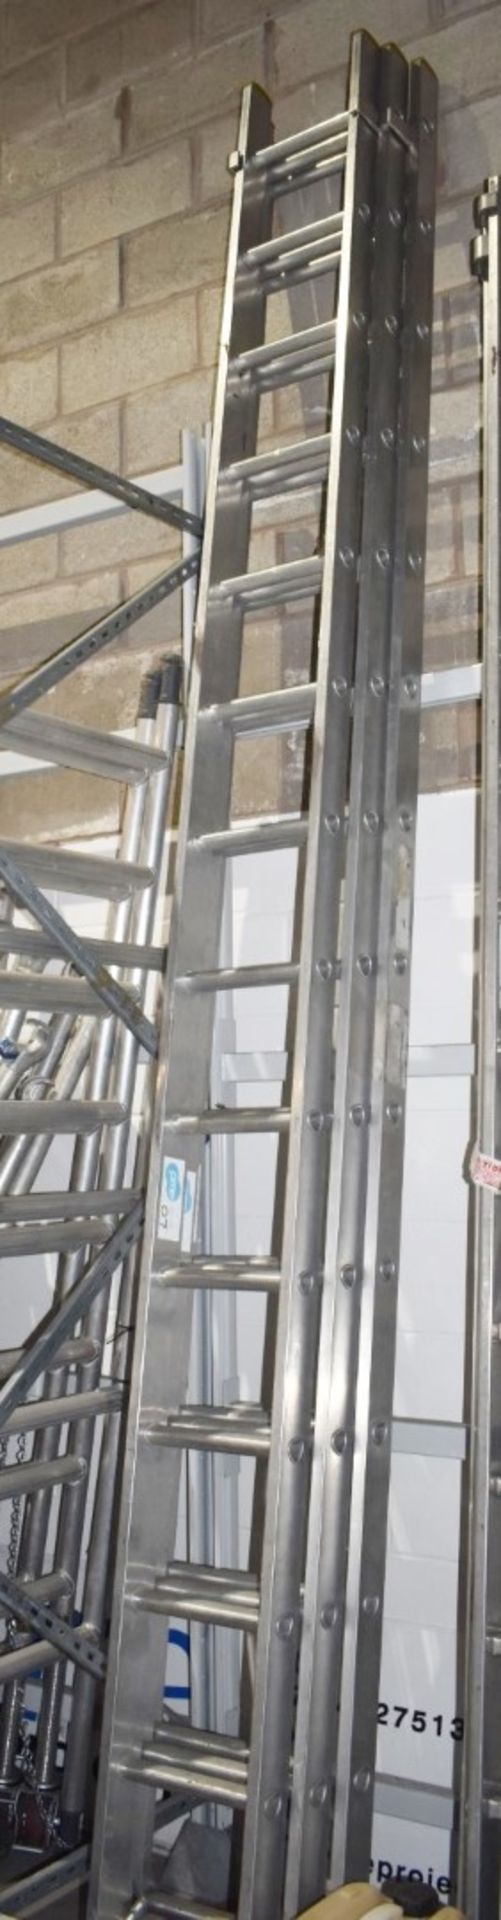 1 x 3 Section Set of Aluminium Work Ladders Each Section Measures 400cm SRB133